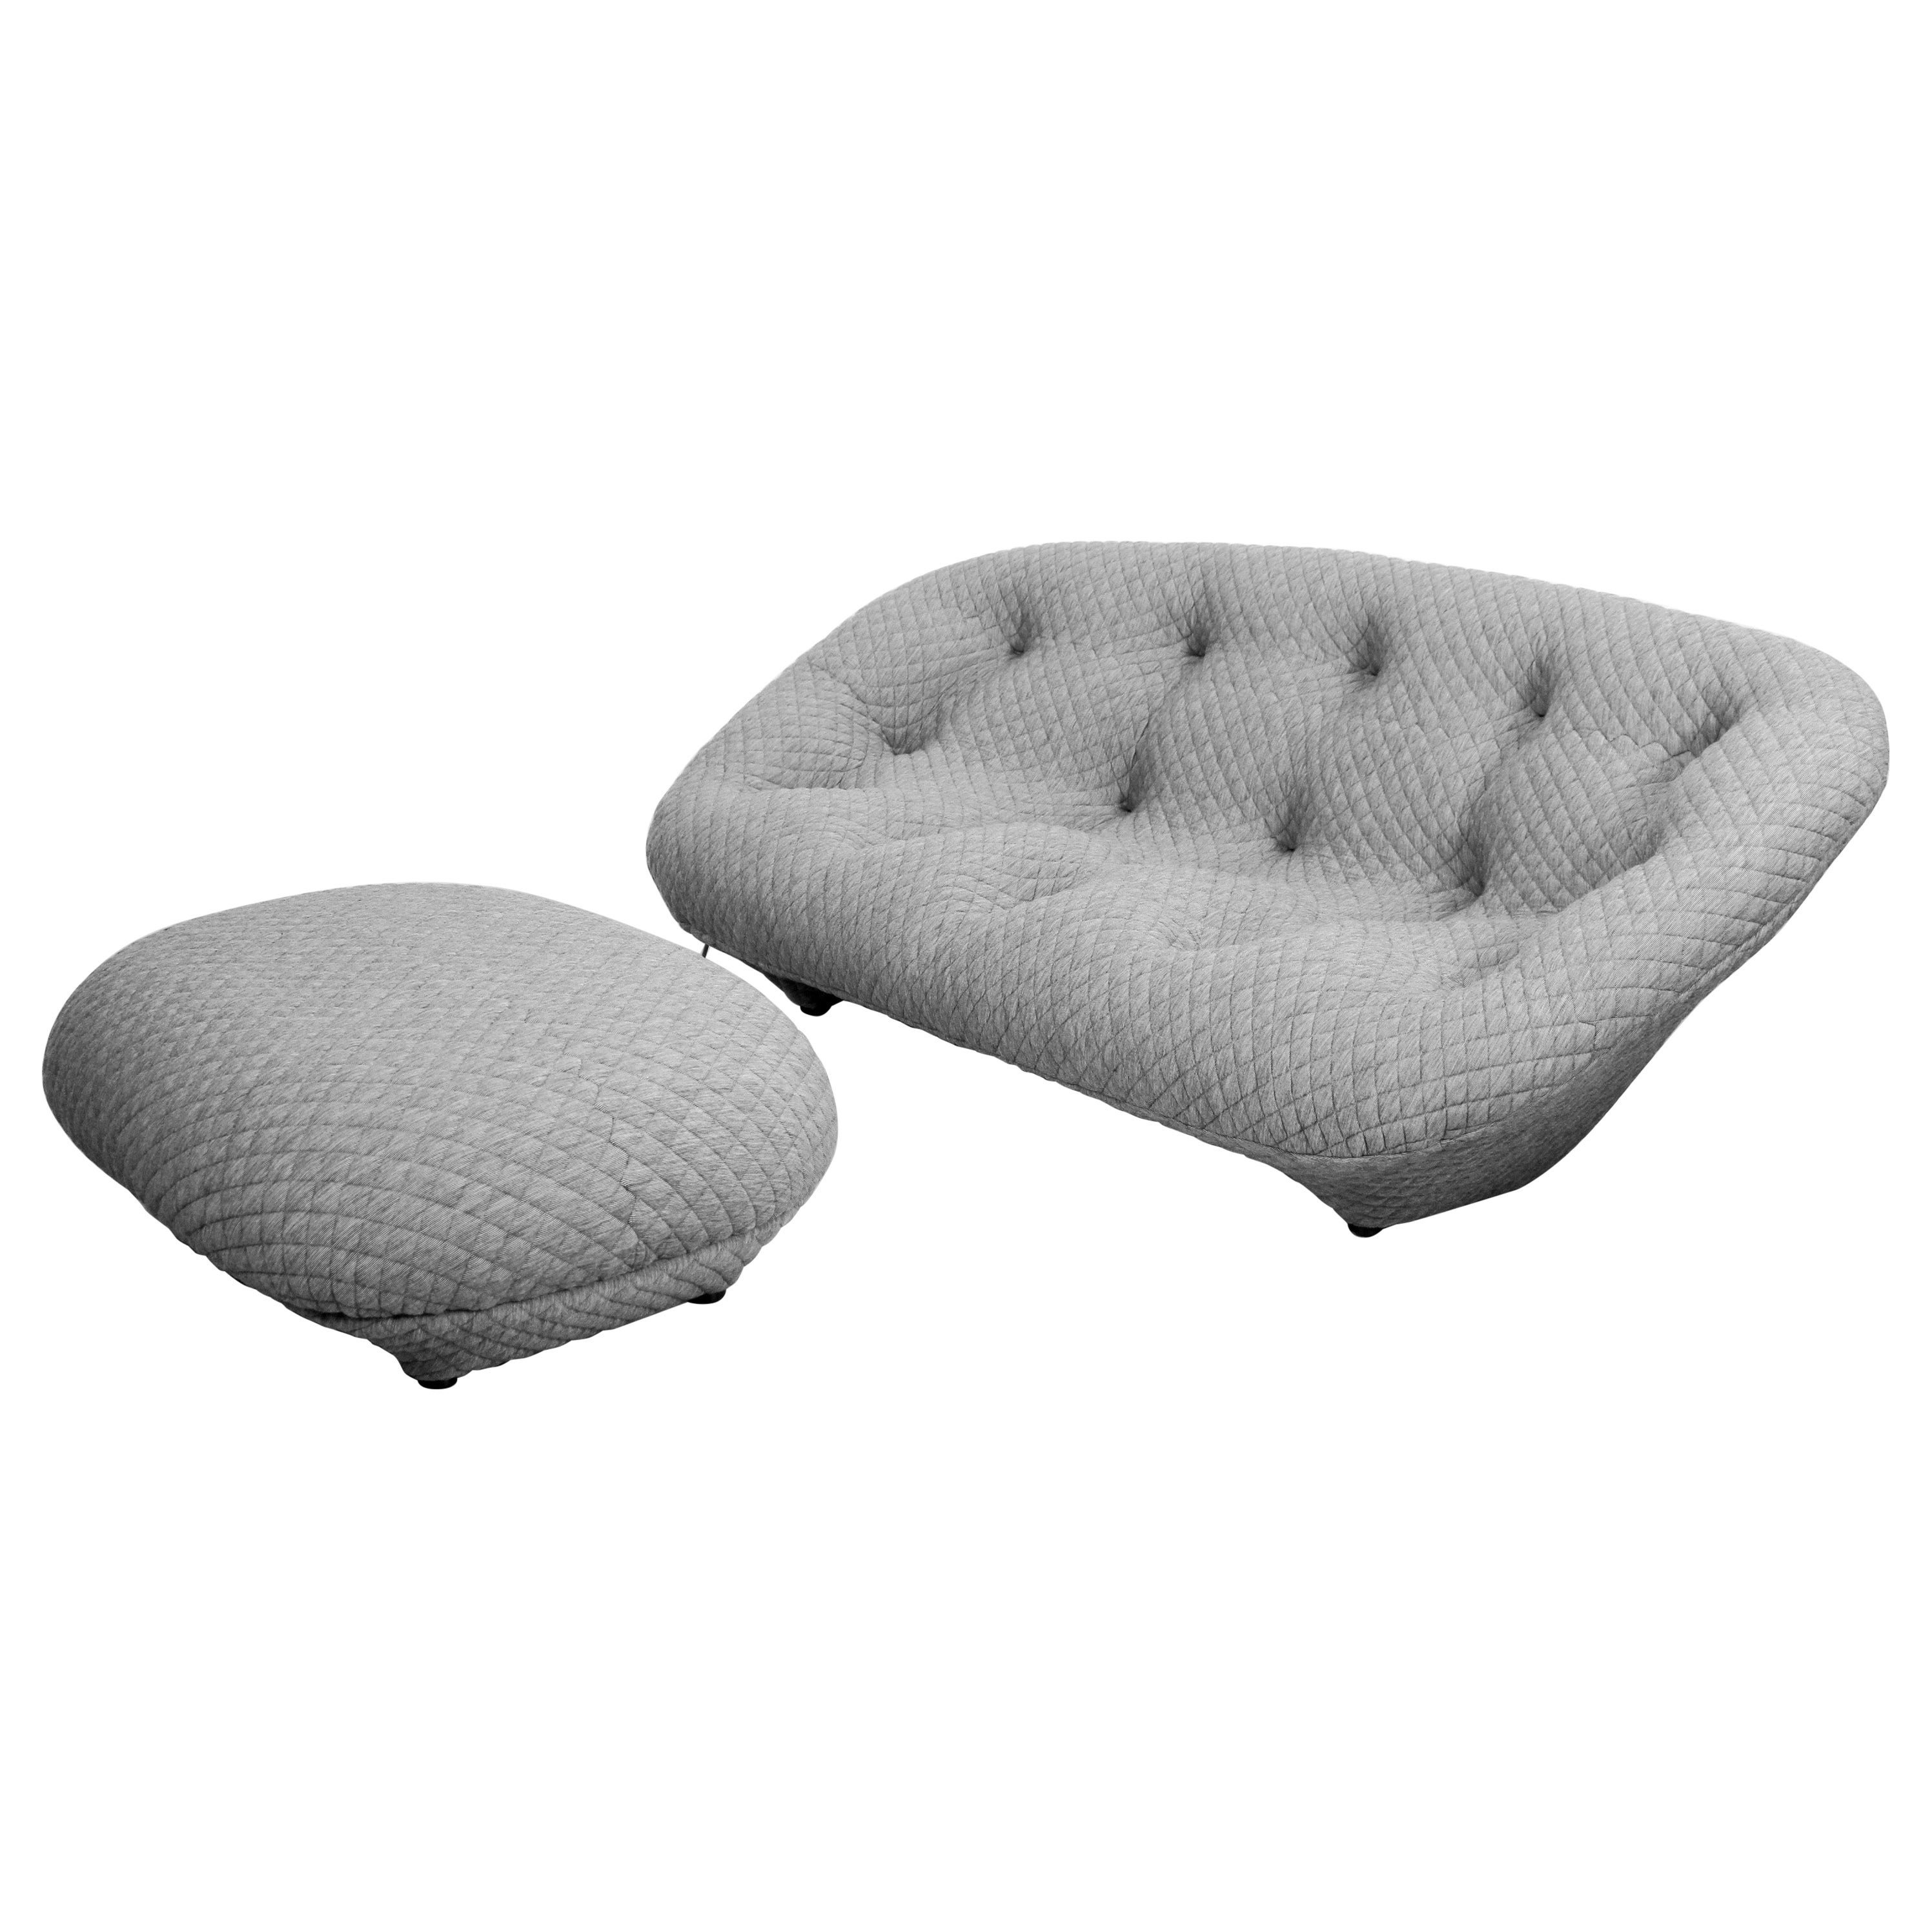 Ploum 3 seater Sofa and Ottoman by E. & R. Bouroullec for Ligne Roset